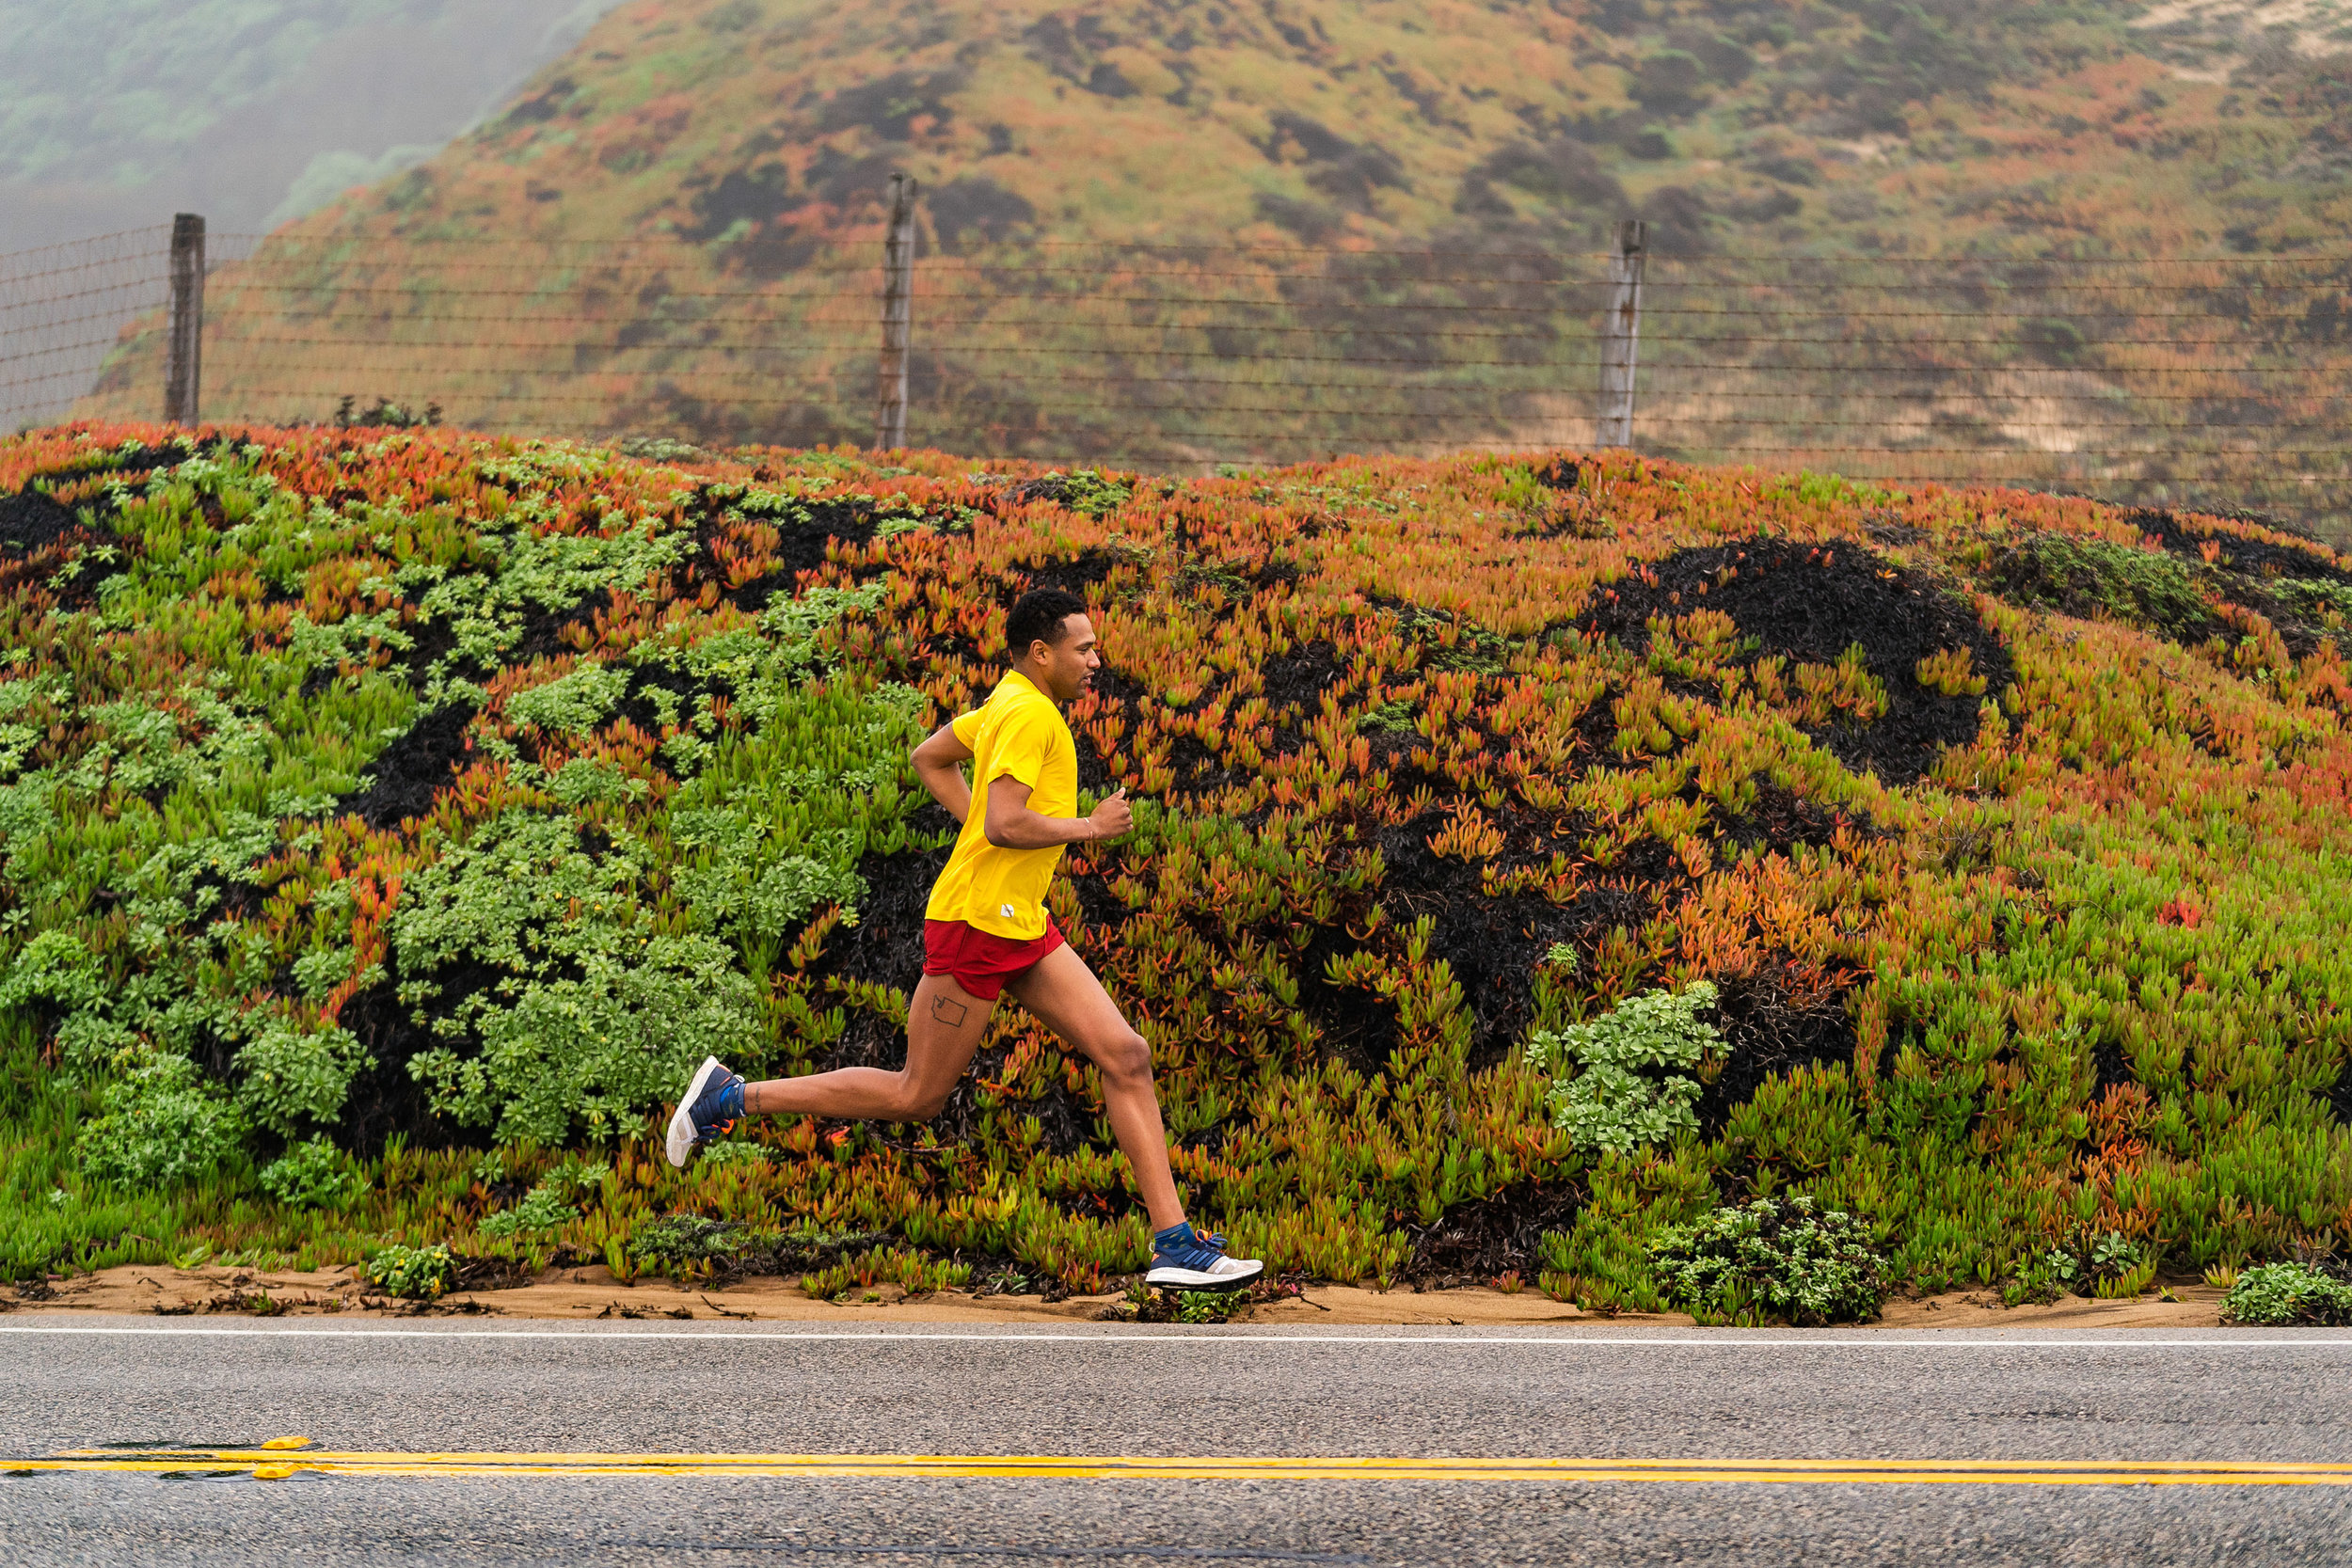  Adventure: Road and trail running along the Big Sur Coast, California 